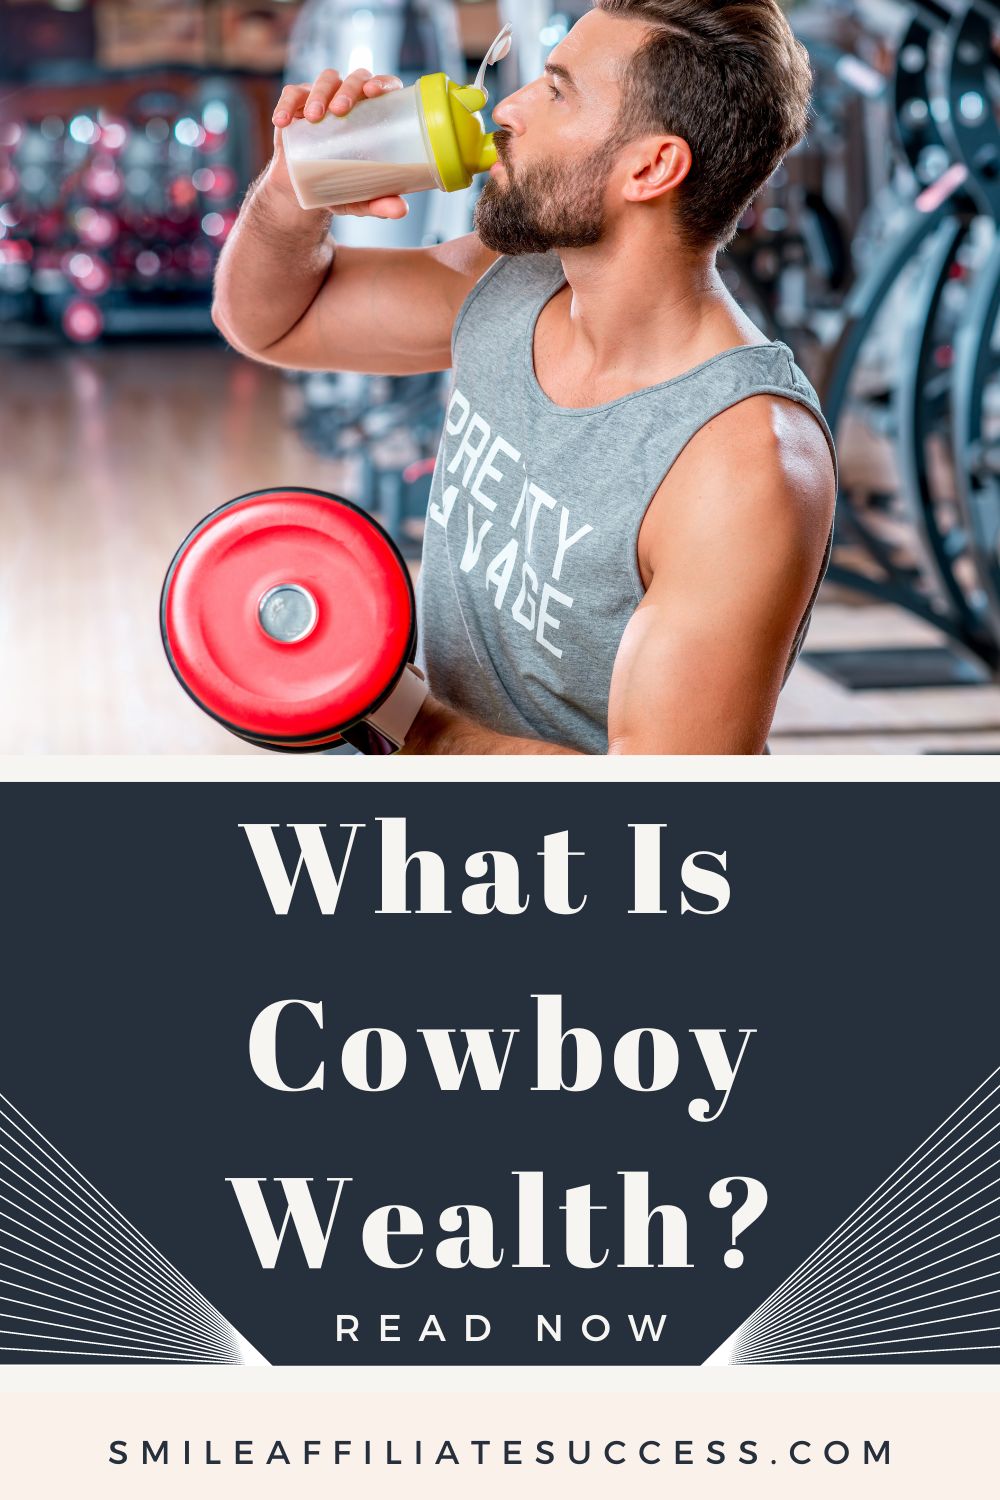 What Is Cowboy Wealth?